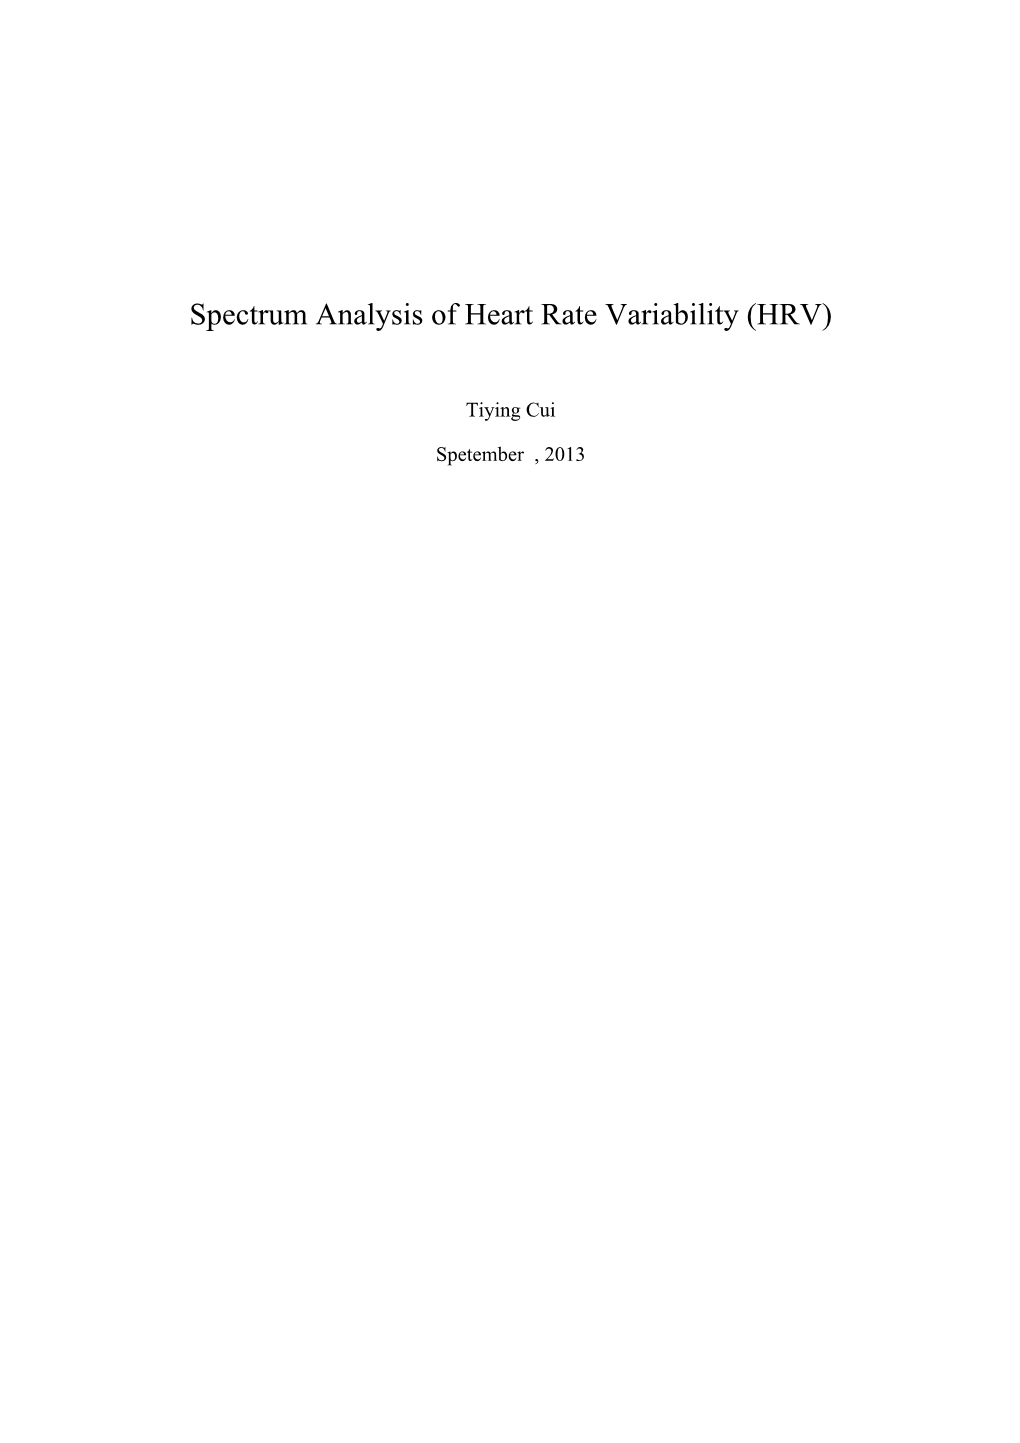 Spectrum Analysis of Heart Rate Variability (HRV)